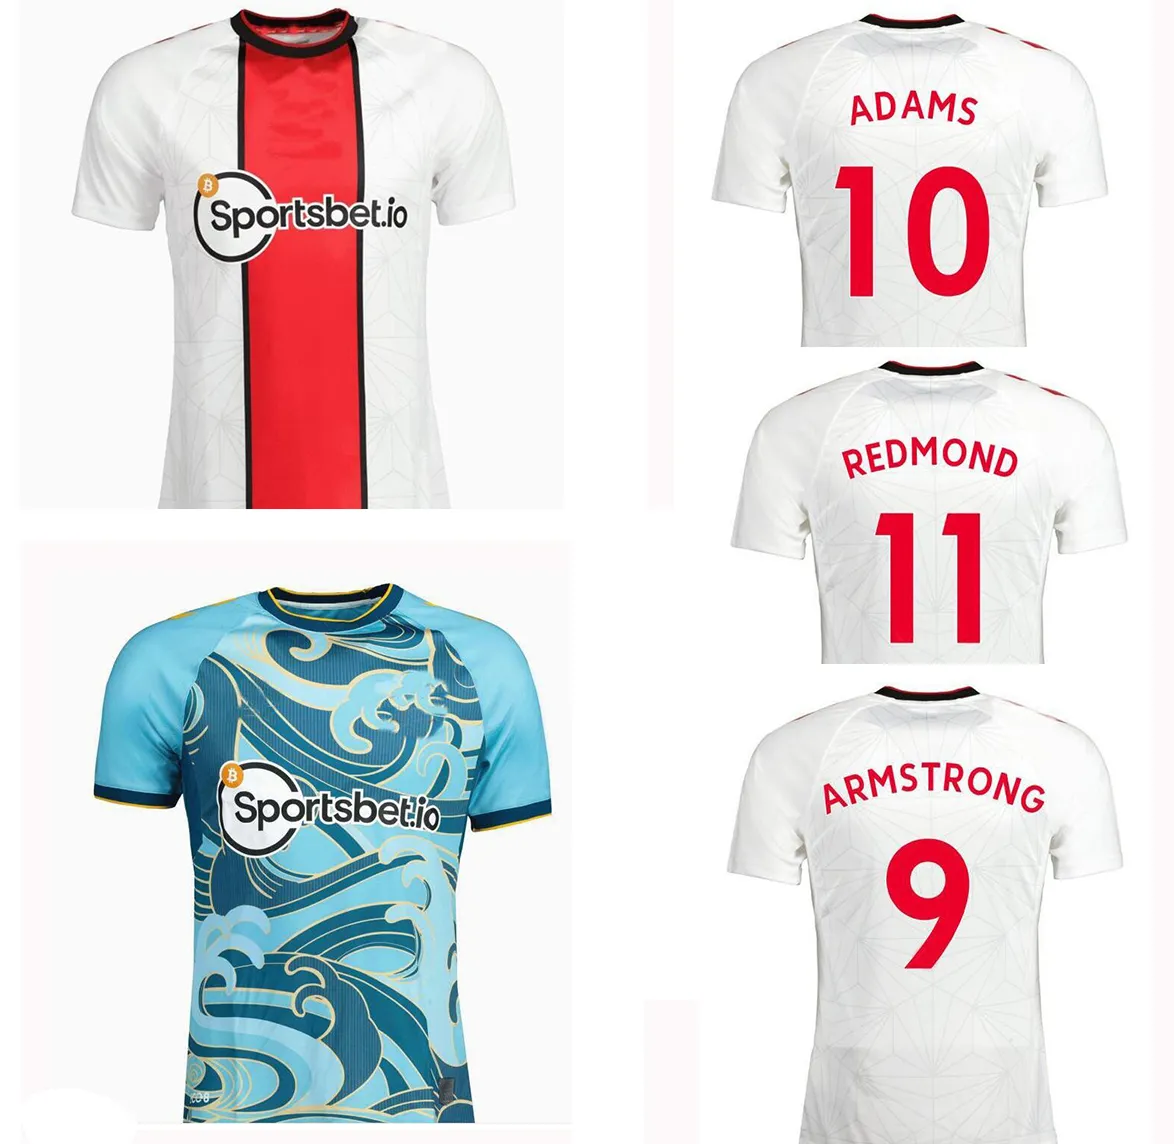 10 ADAMS Customized 22-23Thai Quality Soccer Jerseys Kingcaps Dropshipping Accepted Custom Football Wear 9 ARMSTRONG 8 WARD-PROWSE 6 ROMEU 11 REDMOND 24 ELYOUNOUSSI